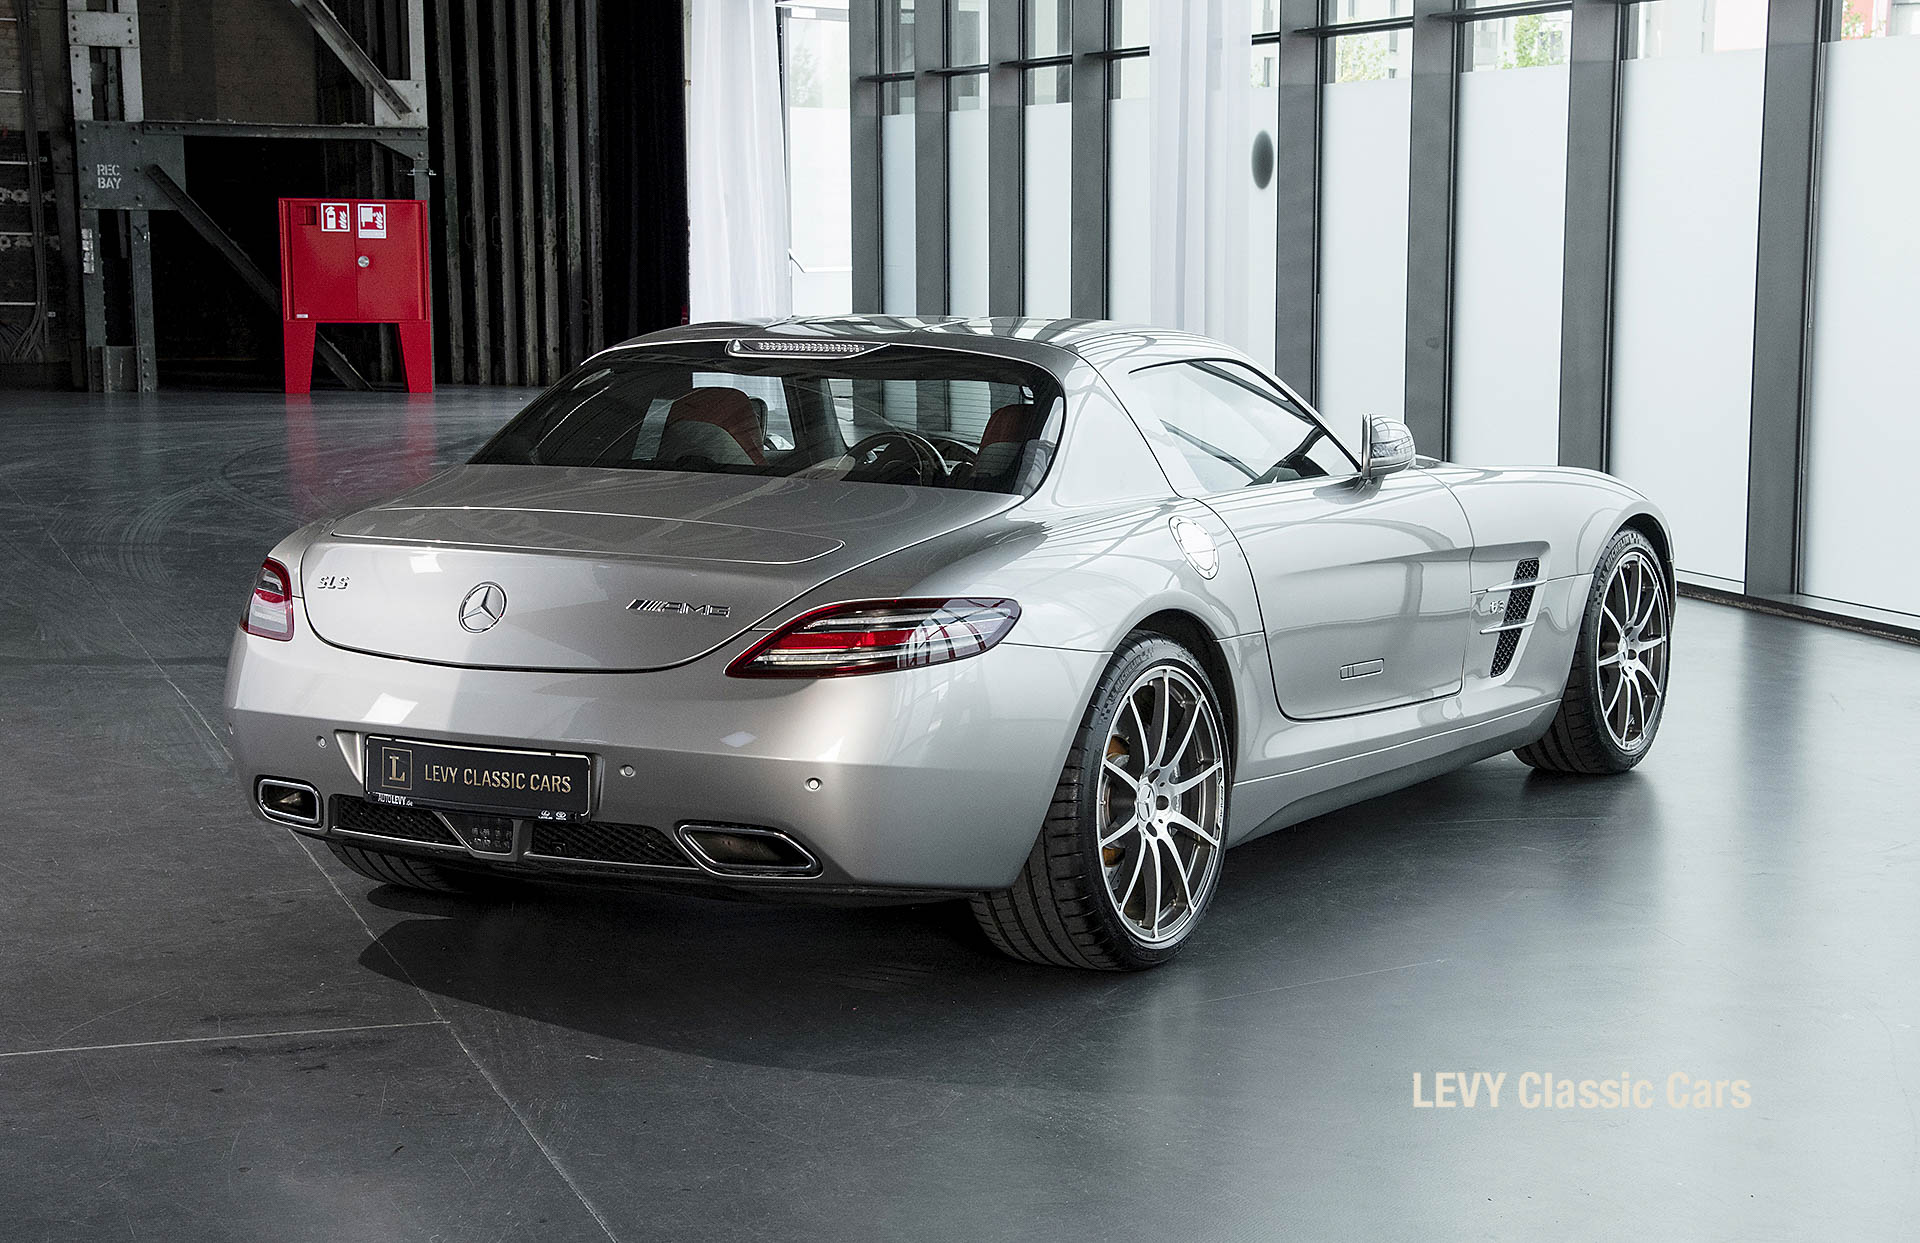 MB SLS AMG 6,3 Coupe 05633 057